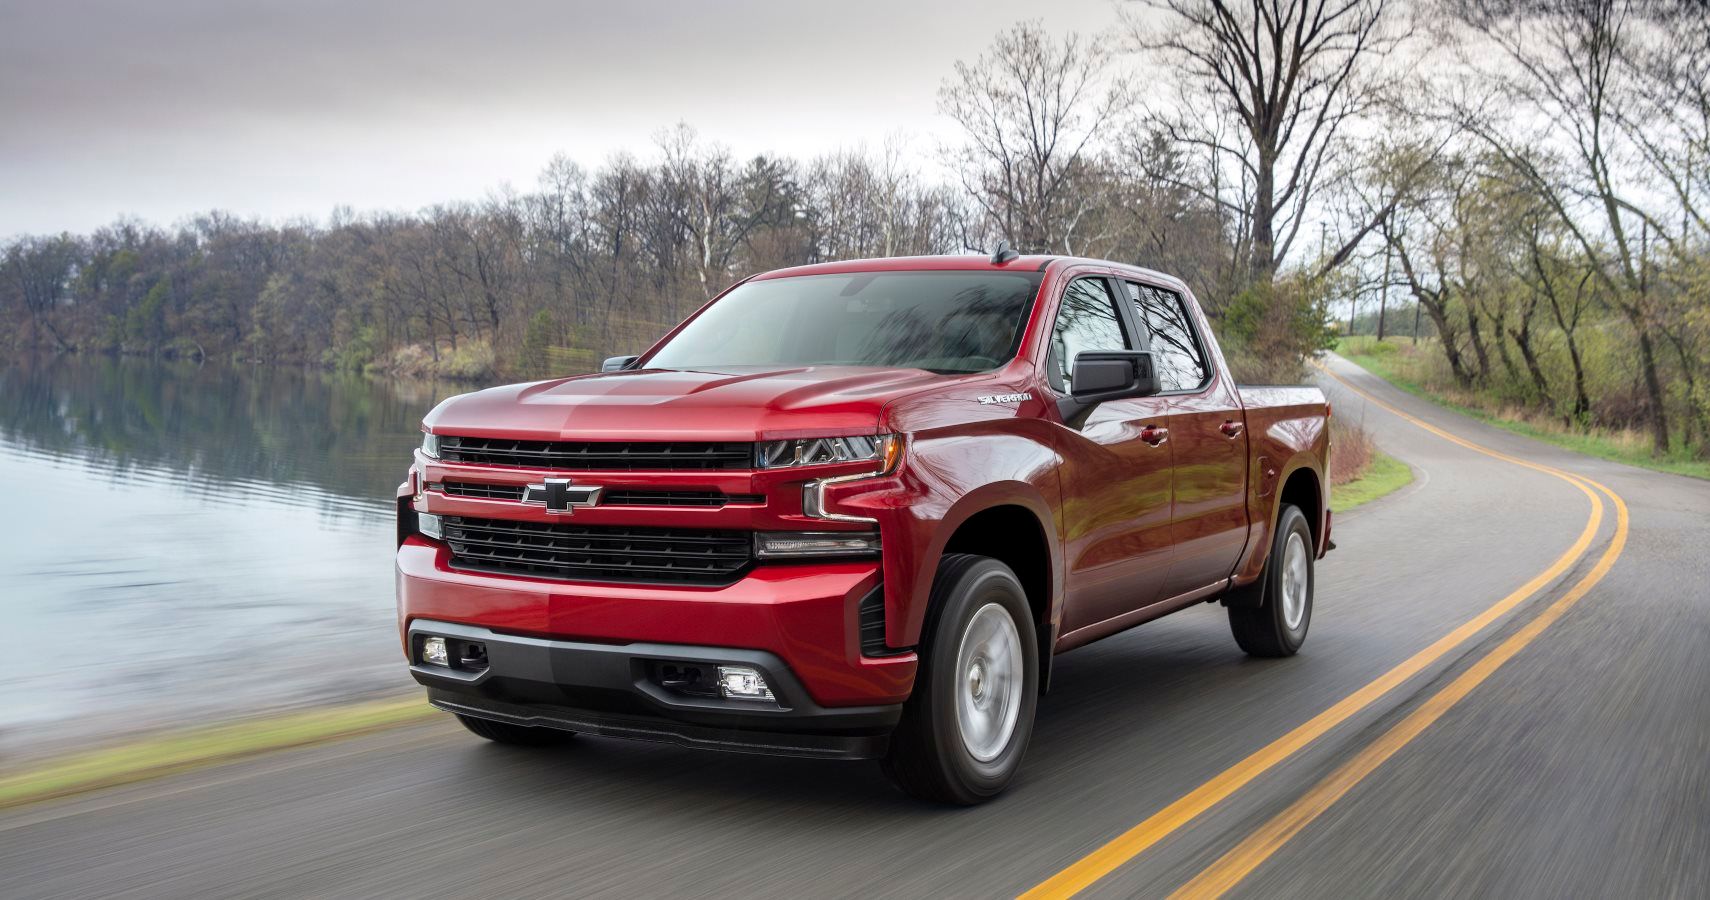 The 2019 Silverado RST comes standard with an all-new, advanced 2.7L Turbo engine Active Fuel Management and stop/start technology, paired with an eight-speed automatic transmission. Available 5.3L V-8 engine is paired with an eight-speed transmission and featured industry-first Dynamic Fuel Management (DFM) with 17 different modes of cylinder deactivation. An all-new Duramax 3.0L Turbo Diesel with start/stop technology paired with a 10-speed transmission will be available as an option in early 